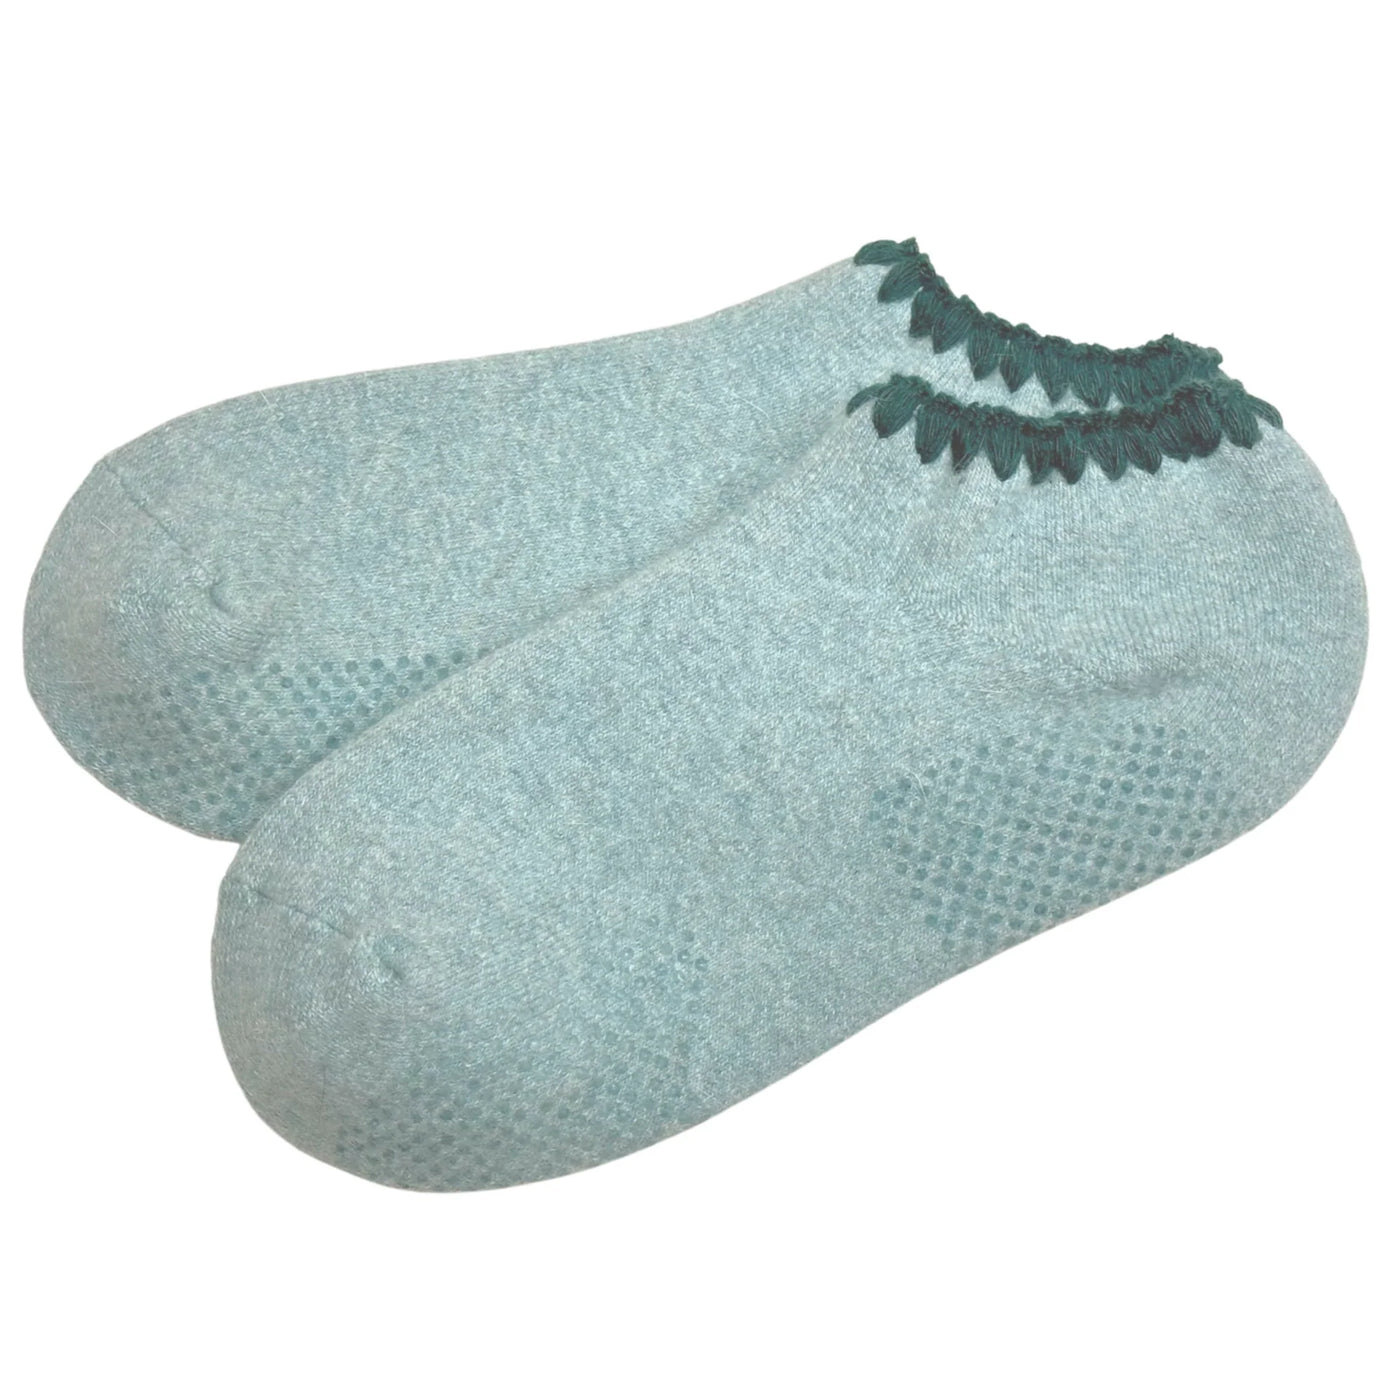 Handcrafted Slipper Socks | Silky Angora with Grips | Large